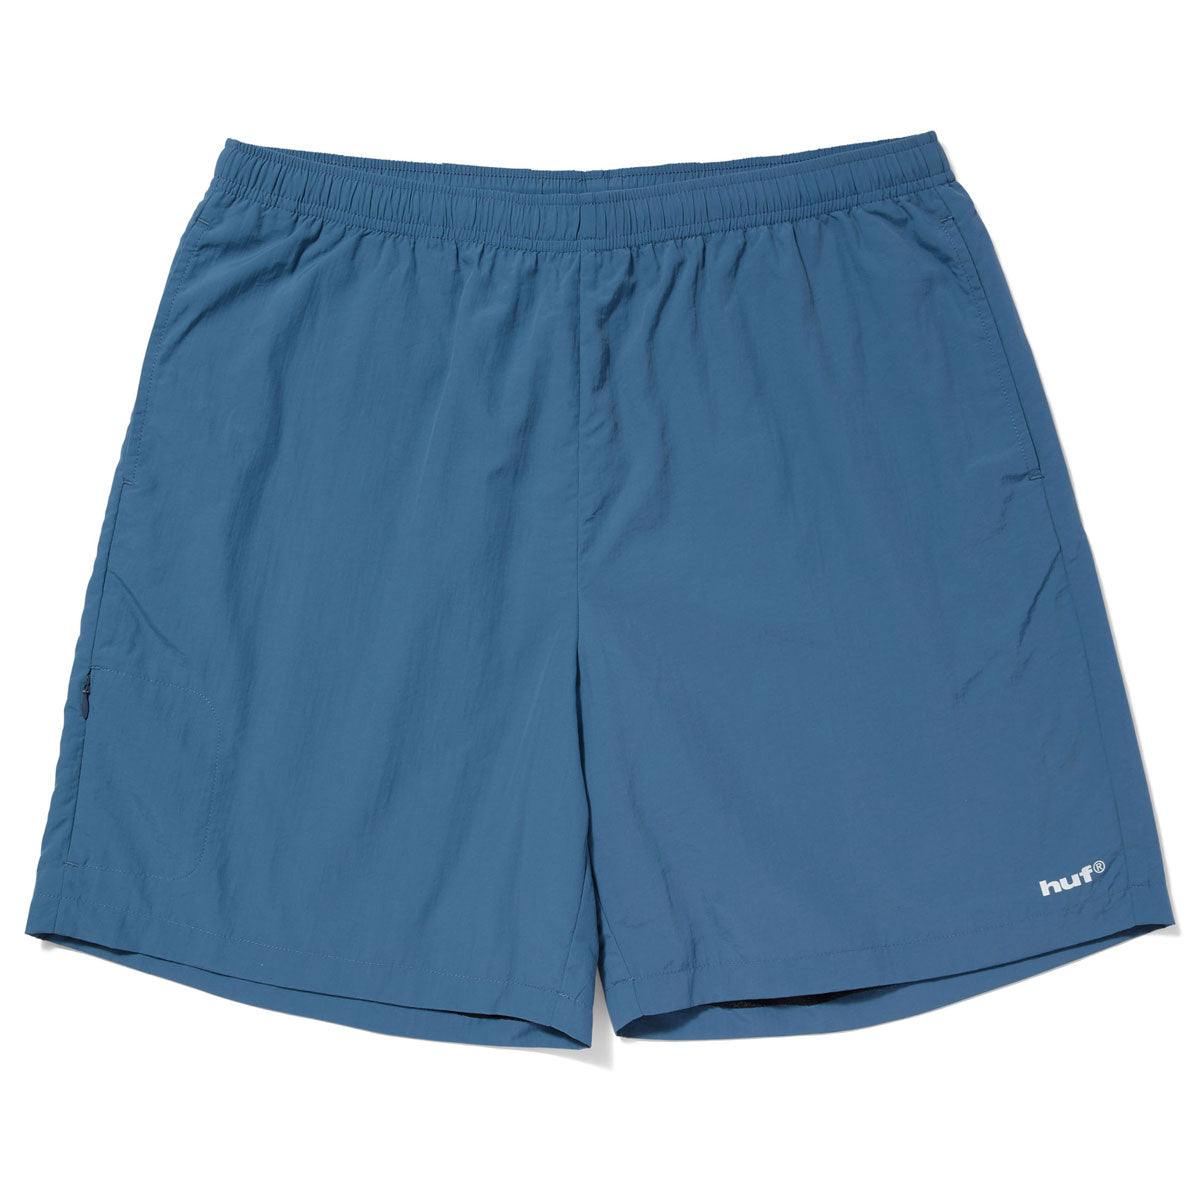 HUF Pacific Easy Shorts - Oil Blue image 1